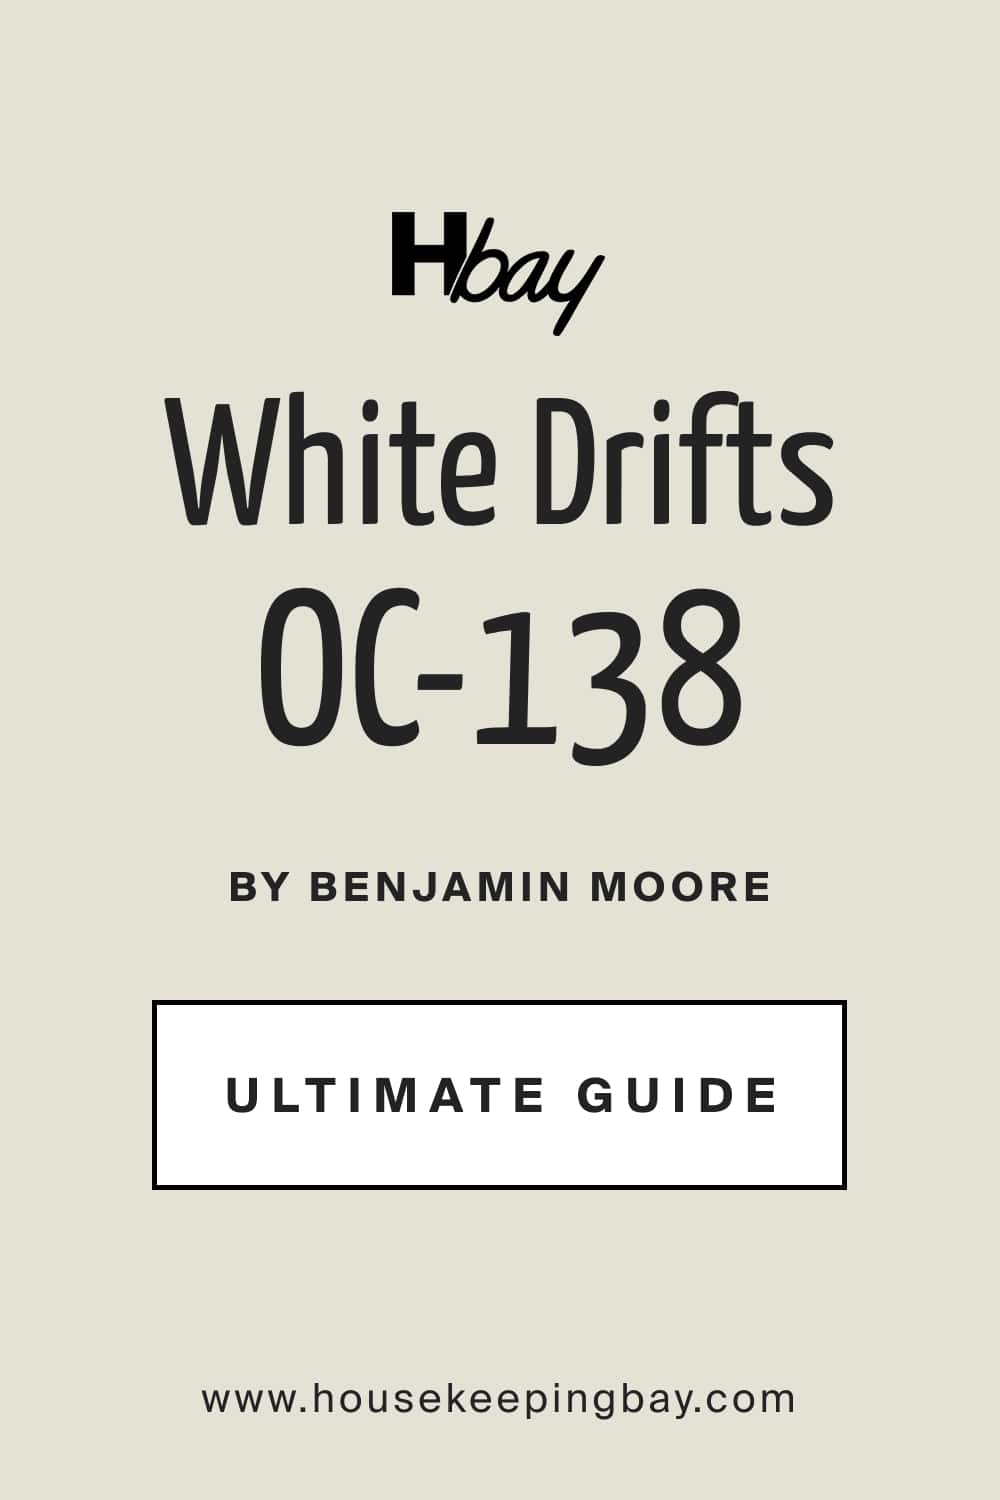 White Drifts OC 138 by Benjamin Moore Ultimate Guide